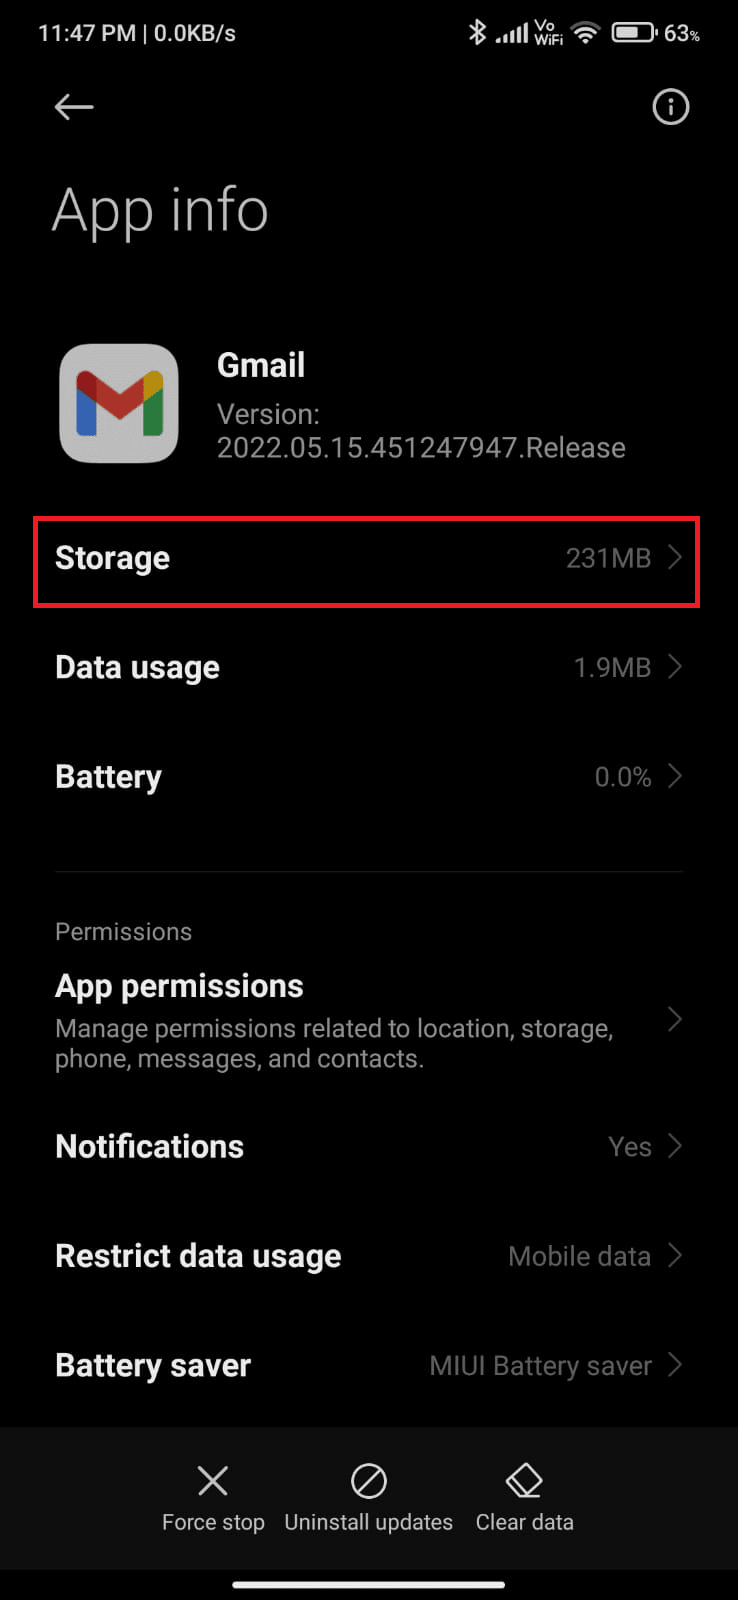 Then, tap on the Storage option 